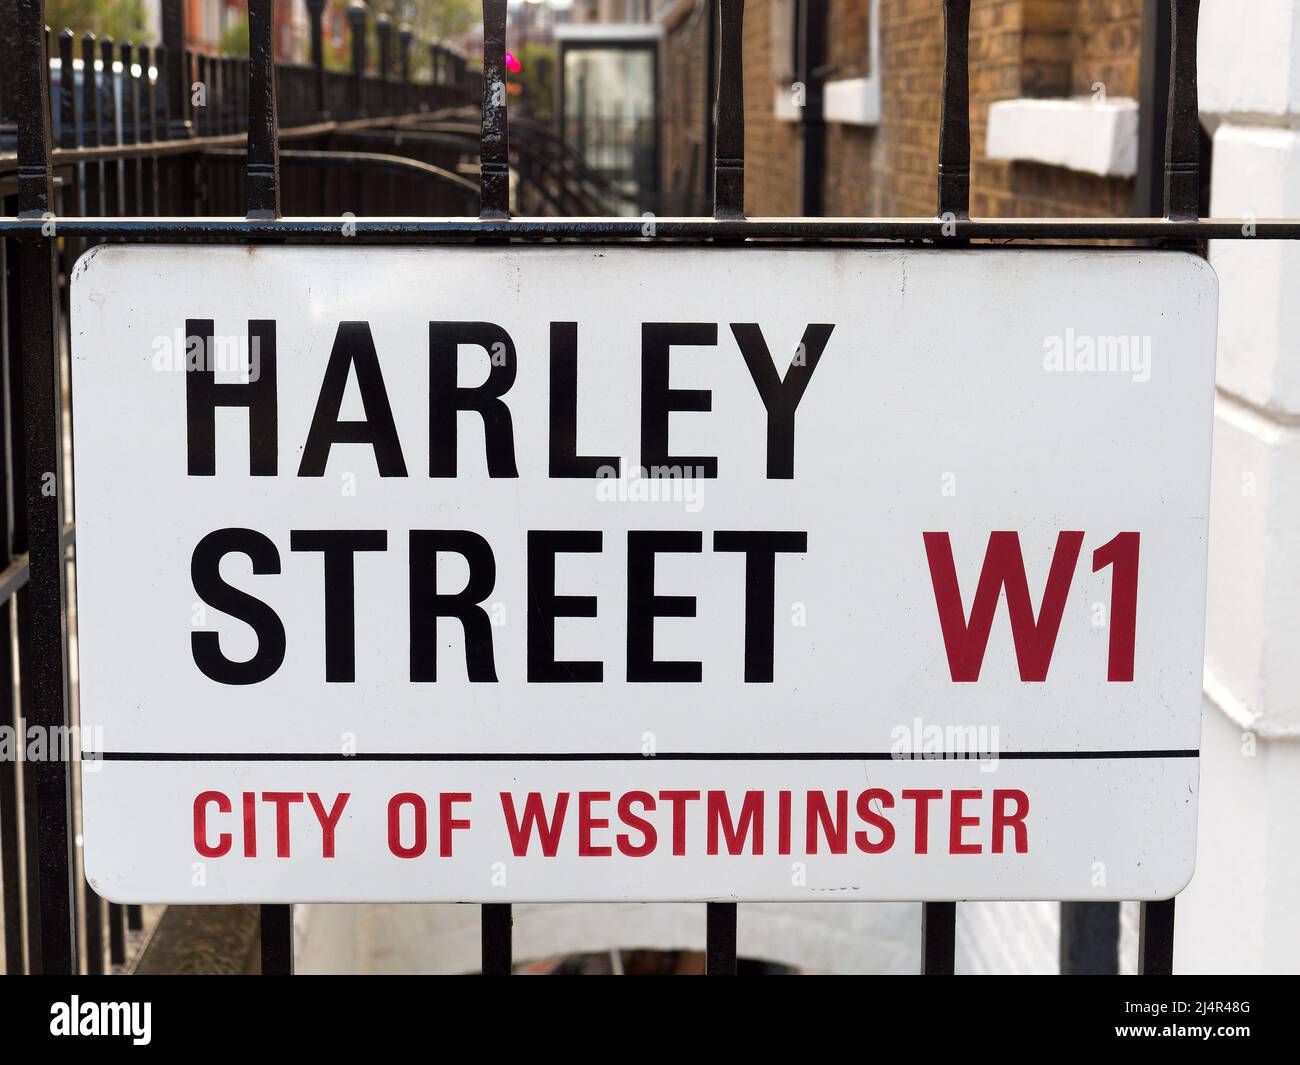 Close-up view looking up at a street sign in Harley Street in London UK Stock Photo